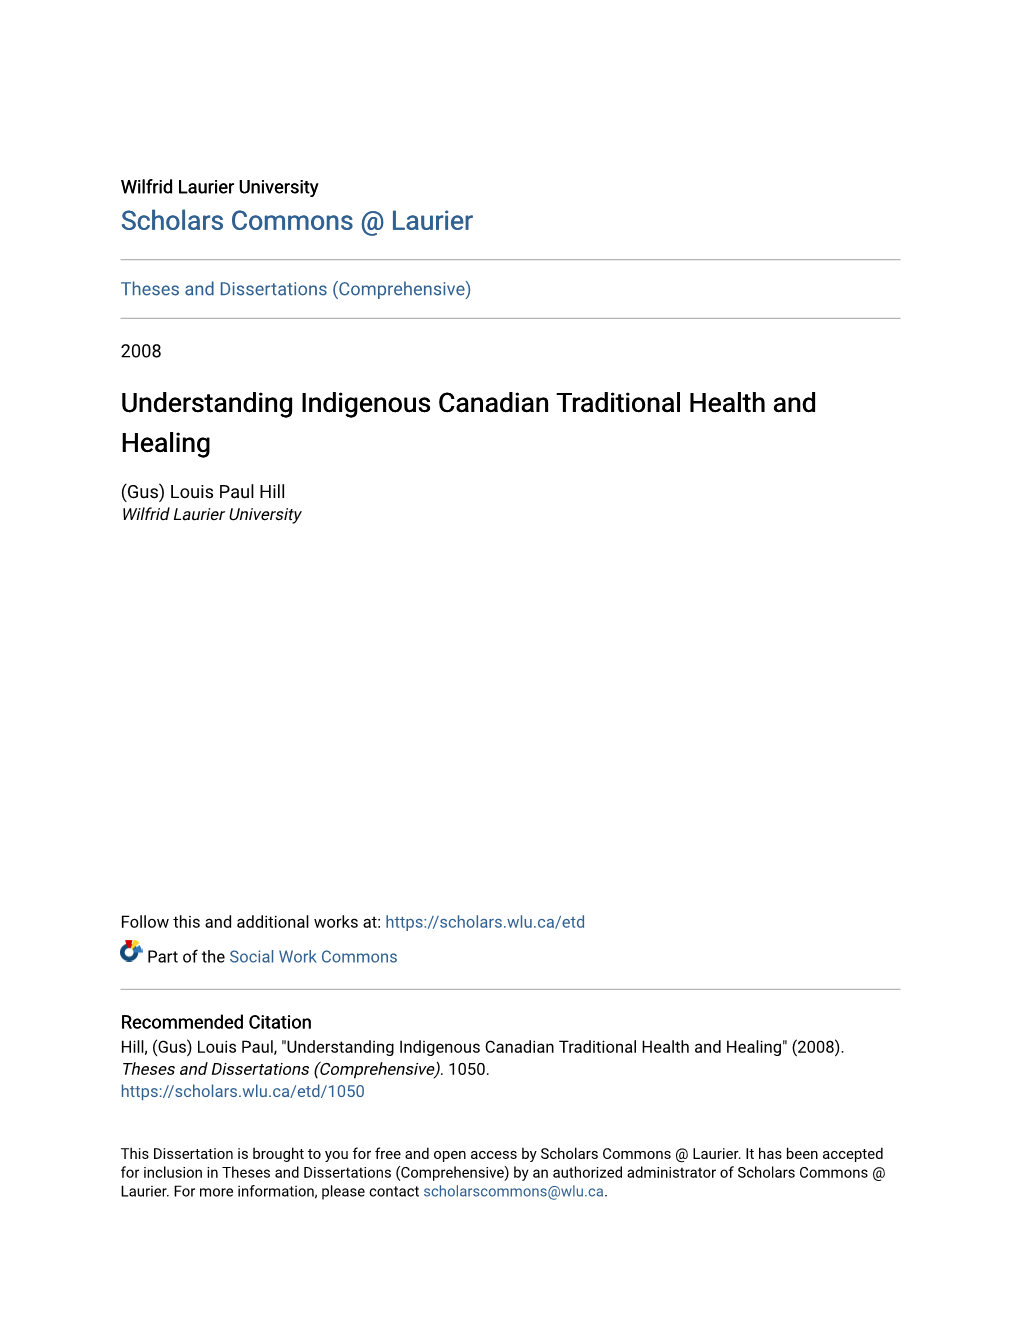 Understanding Indigenous Canadian Traditional Health and Healing